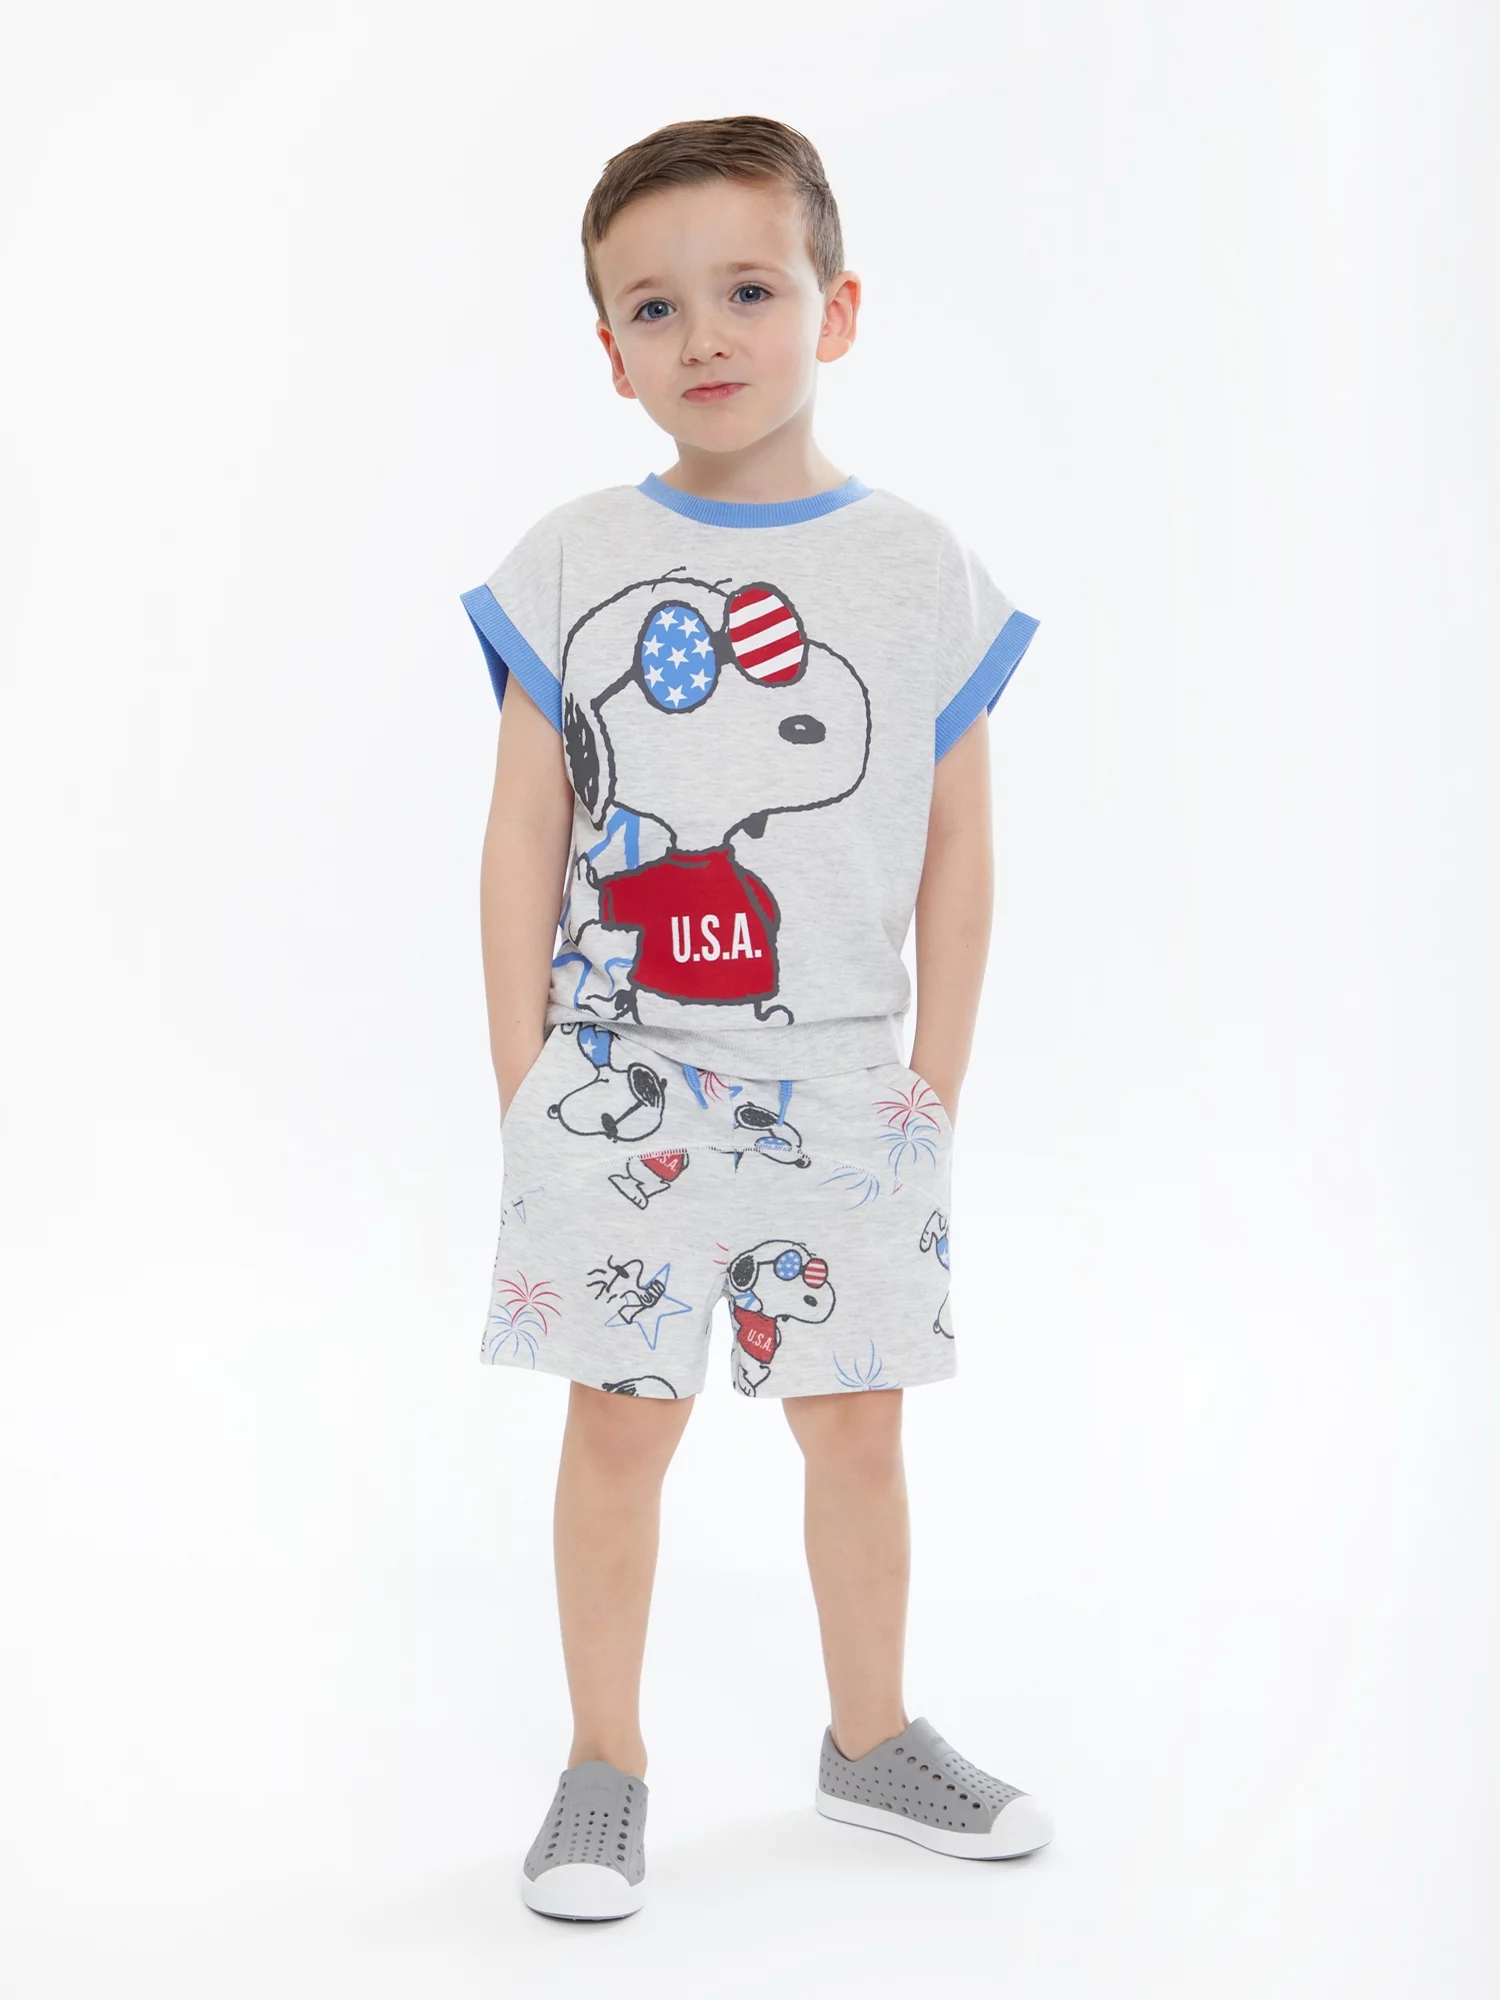 Peanuts Snoopy Toddler Boy Americana T-Shirt and Shorts Set, Sizes 12M-5T